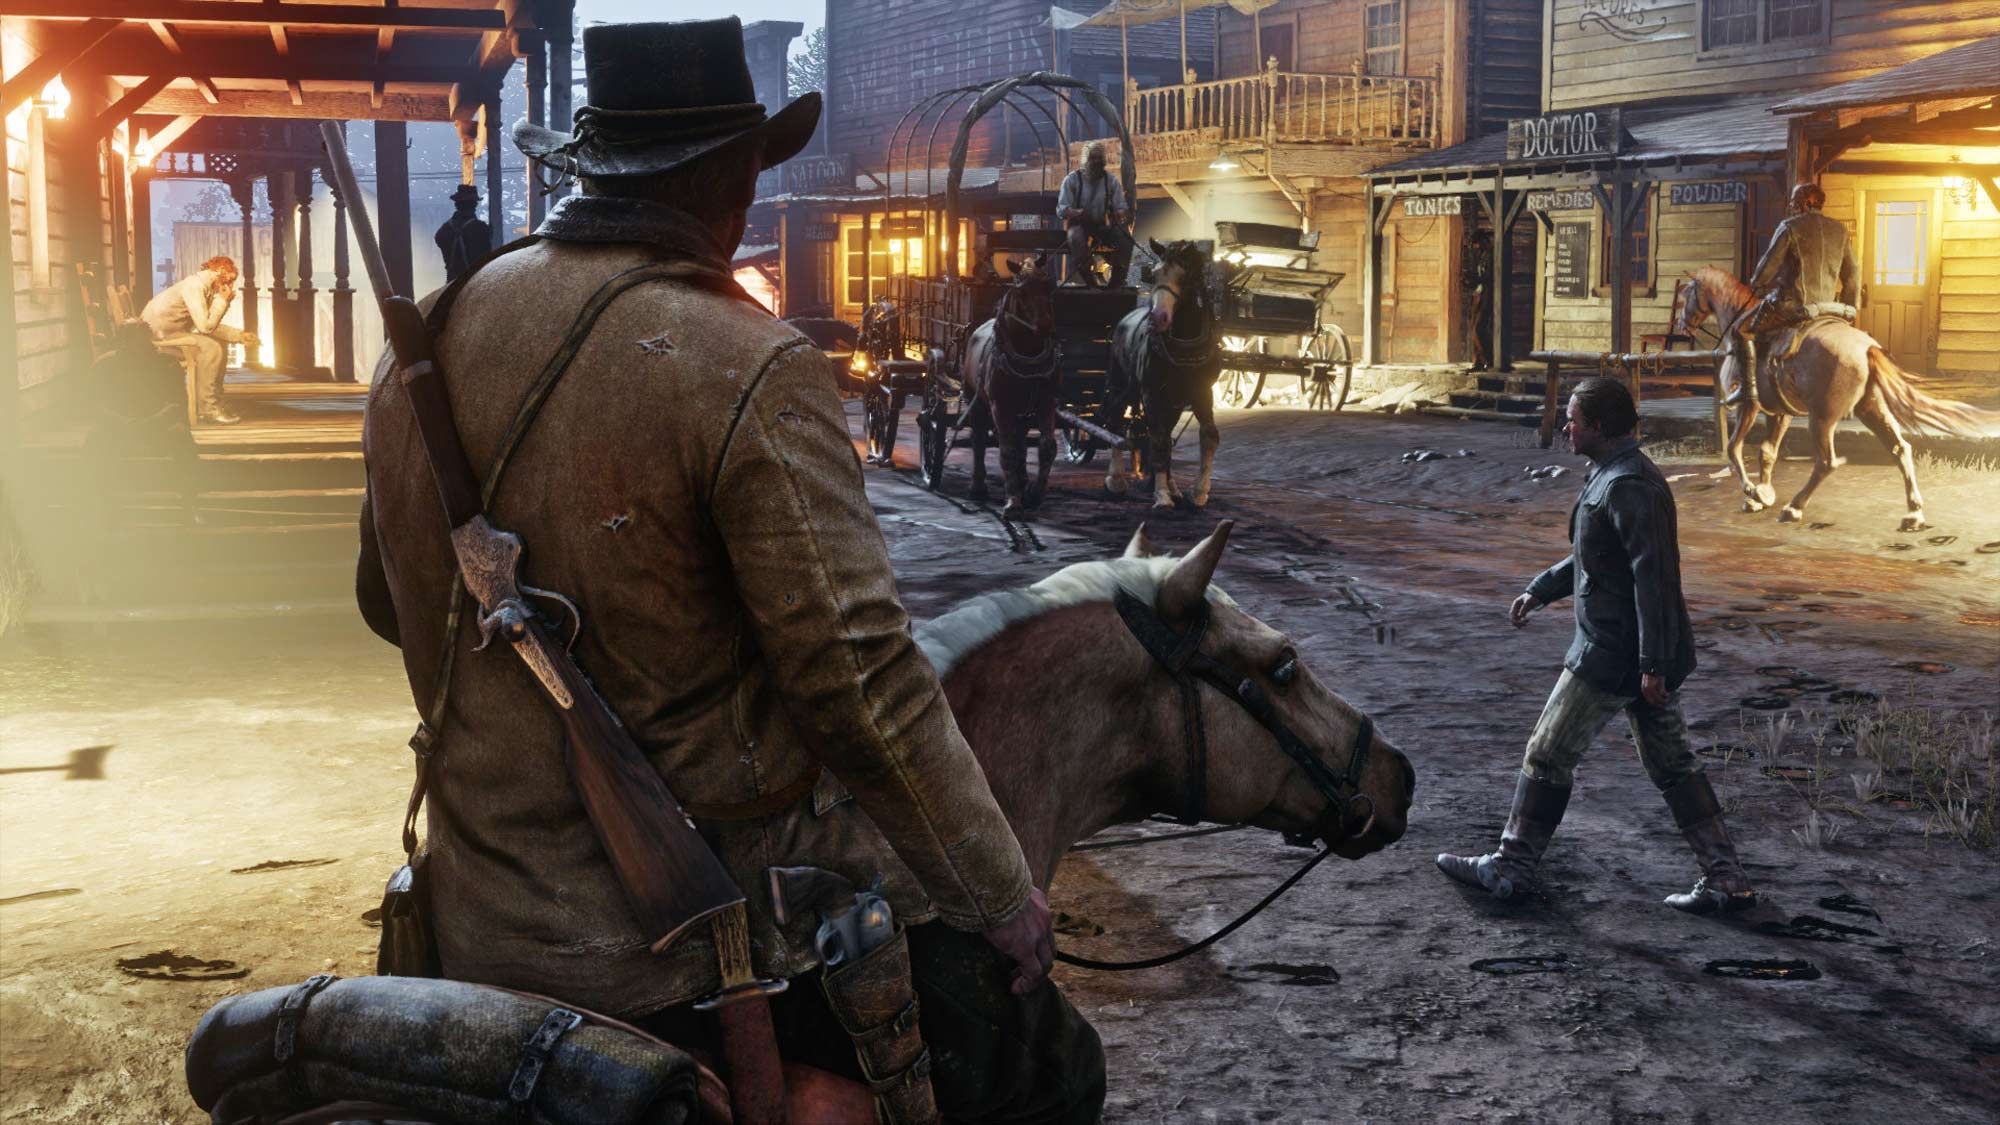 Dead Redemption 2 release date, news, trailers and you need to know